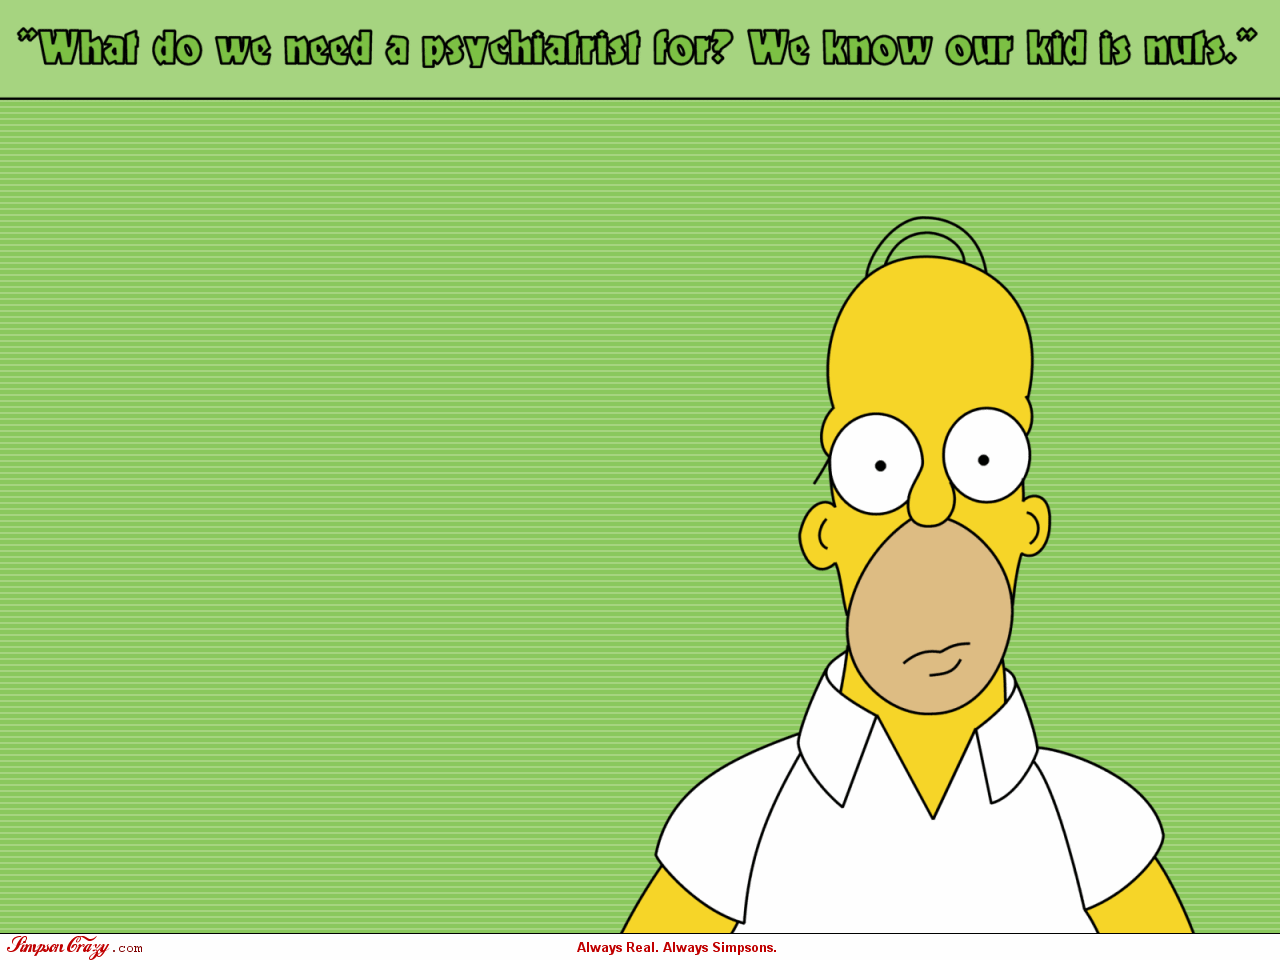 Free Download Homer The Simpsons Wallpaper 1280x960 For Your Desktop Mobile Tablet Explore 74 Homer Simpson Desktop Wallpaper Homer Wallpaper Homer Simpson Wallpaper Hd Free Simpsons Wallpaper